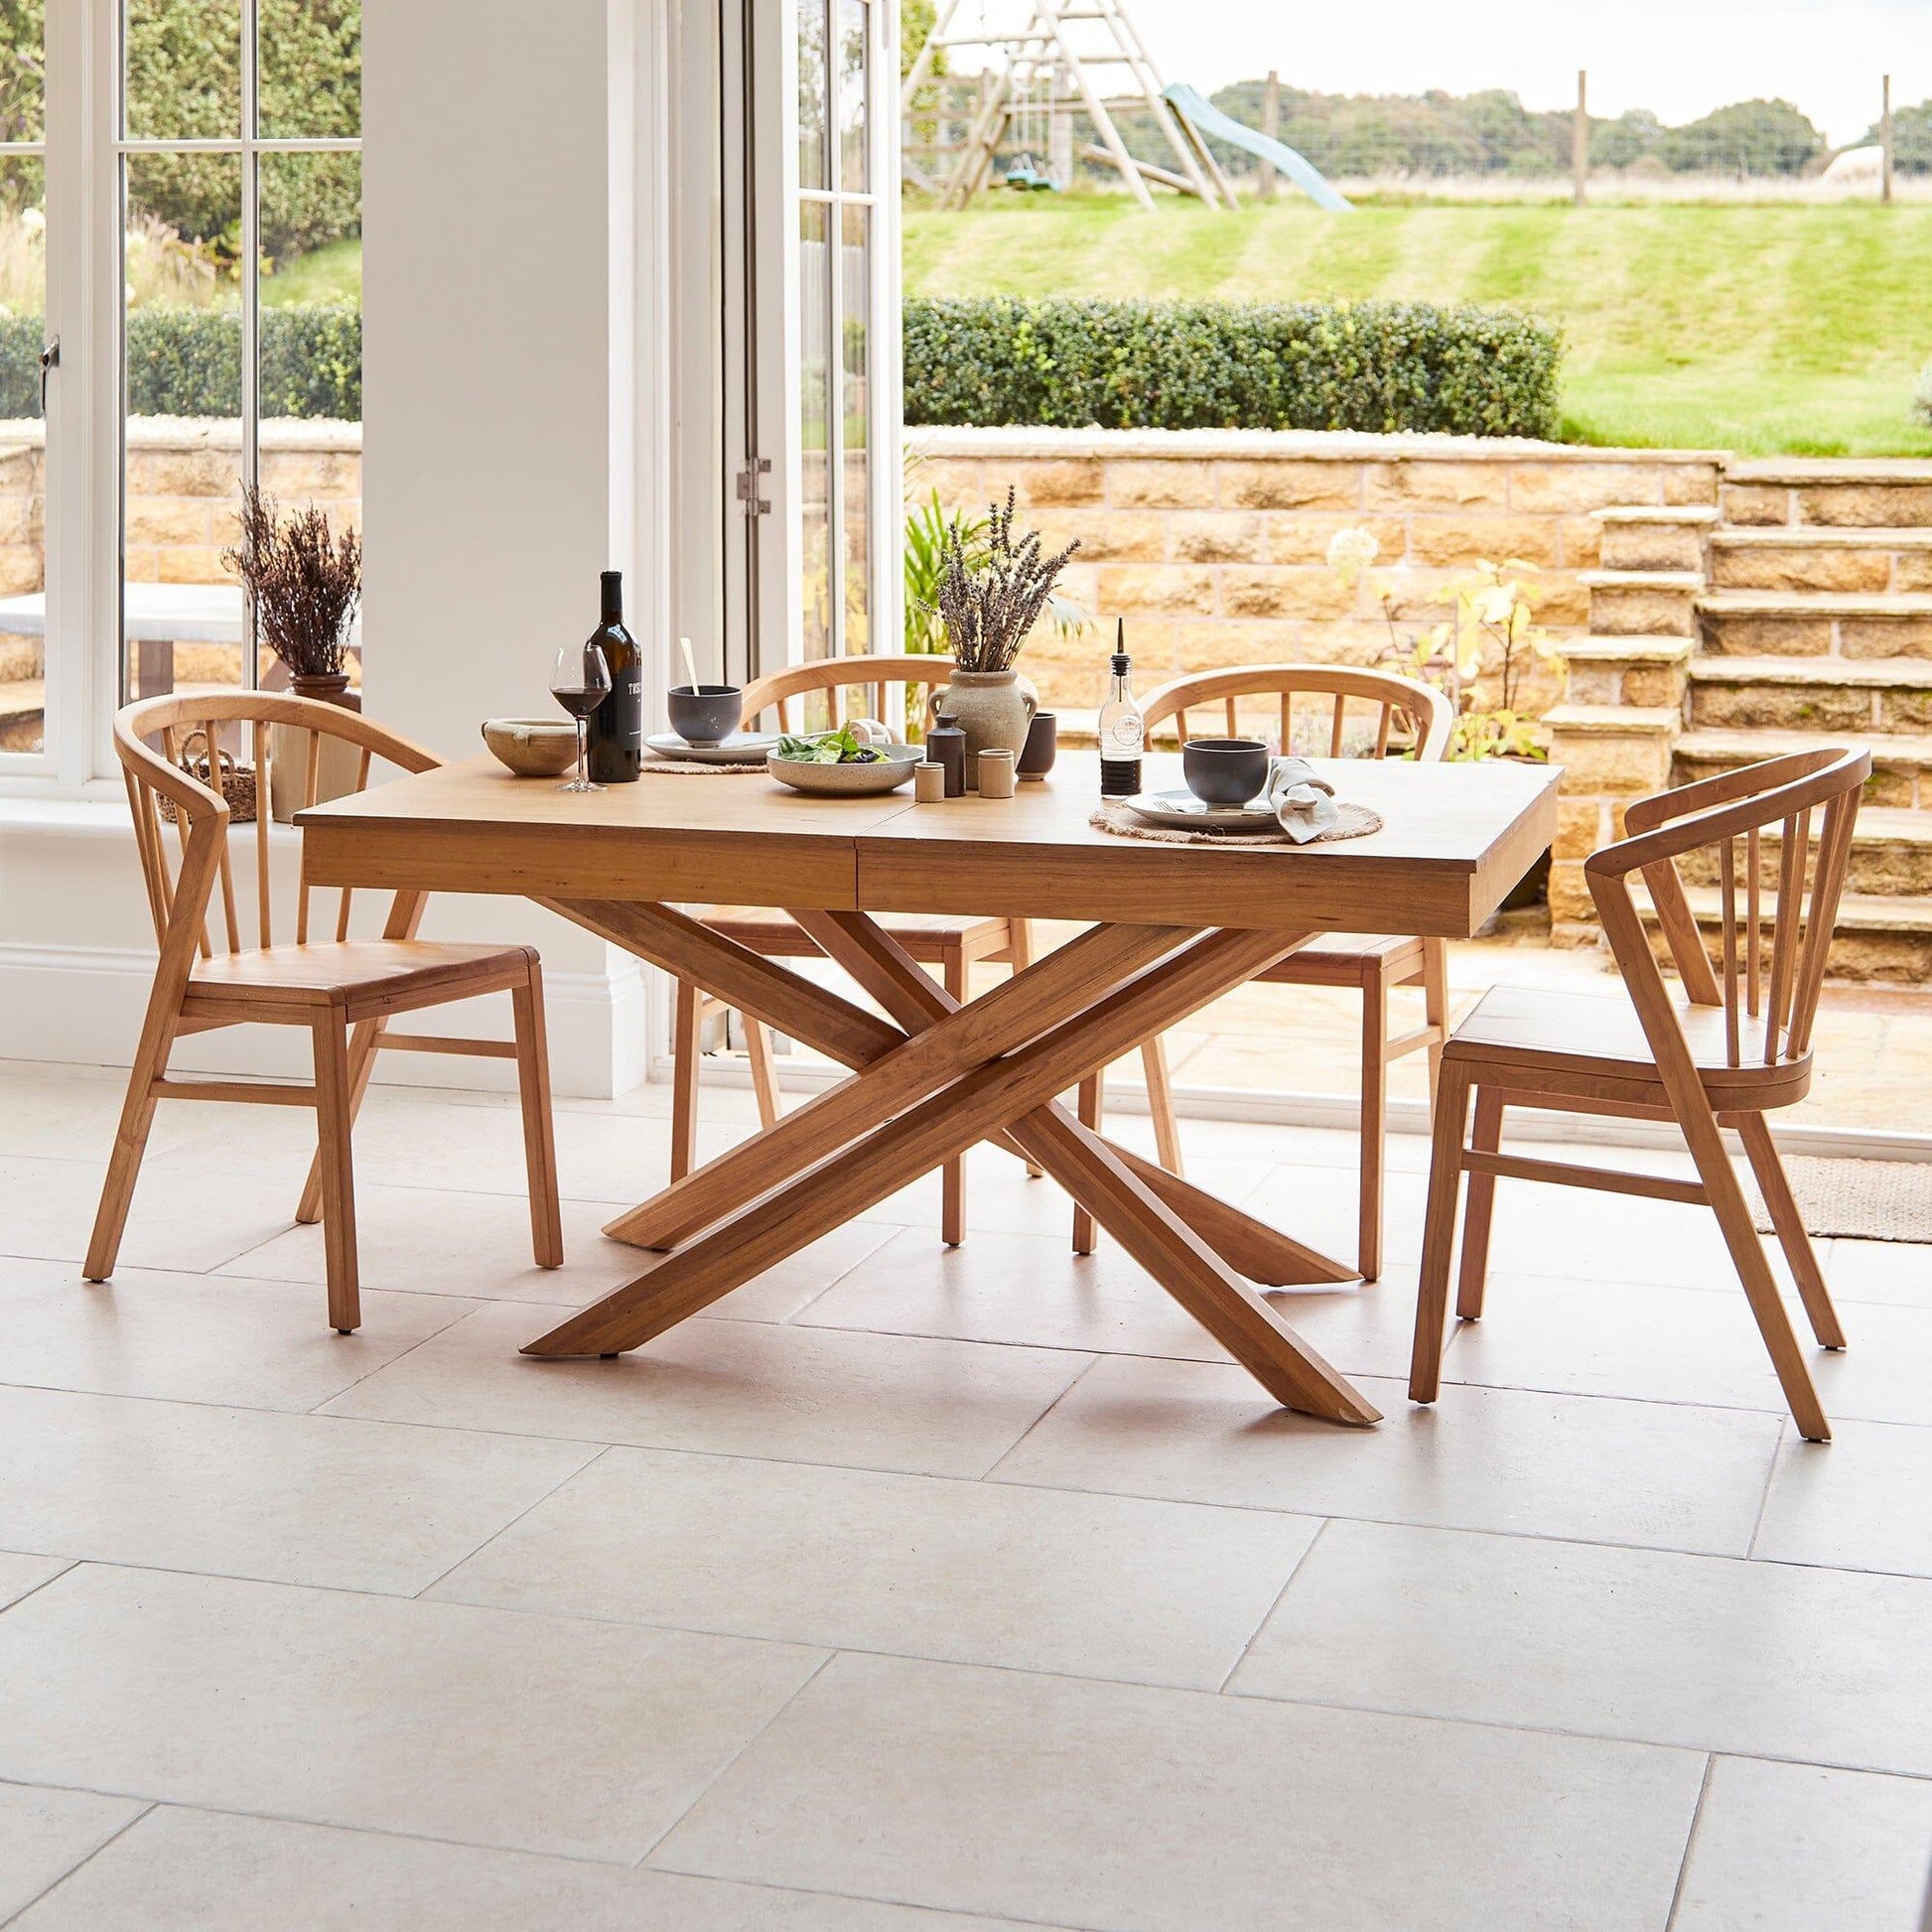 Amelia Oak Dining Table Set - 6 Seater - Oak Spindle Back Chairs - Laura James